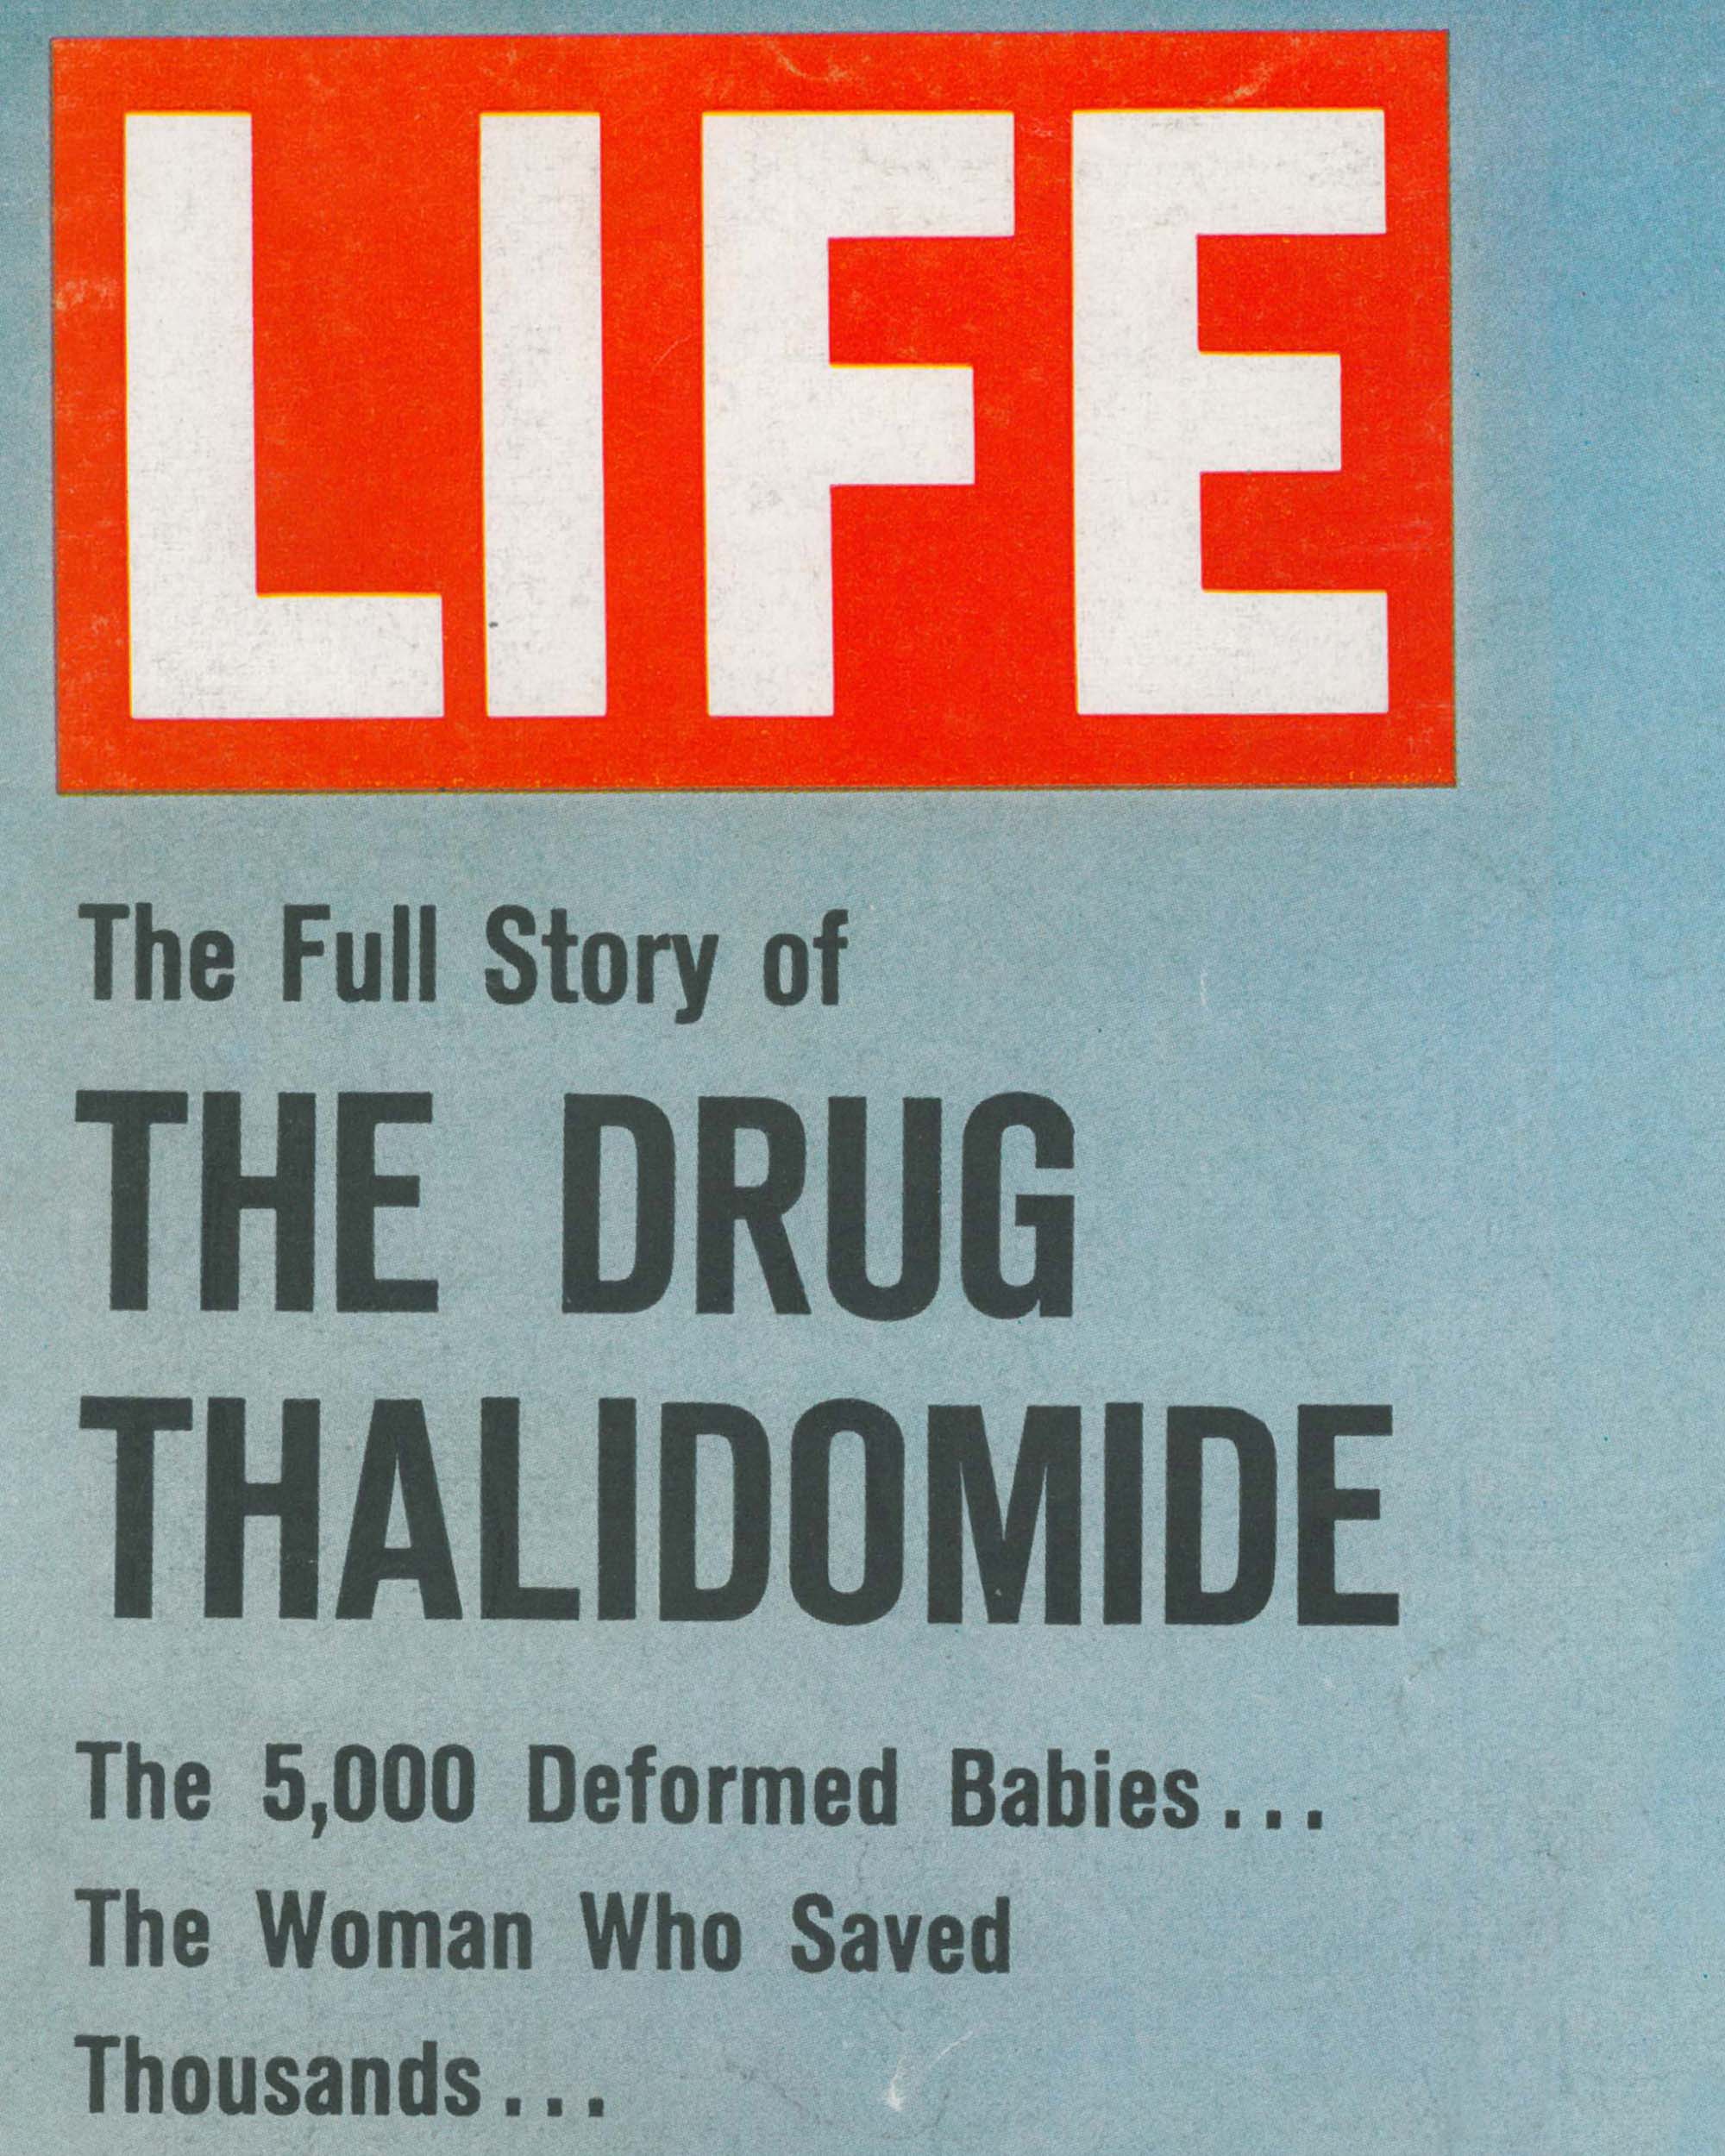 Thalidomide, a drug used to treat morning sickness in the late 50s, often caused limb abnormality in newborns.